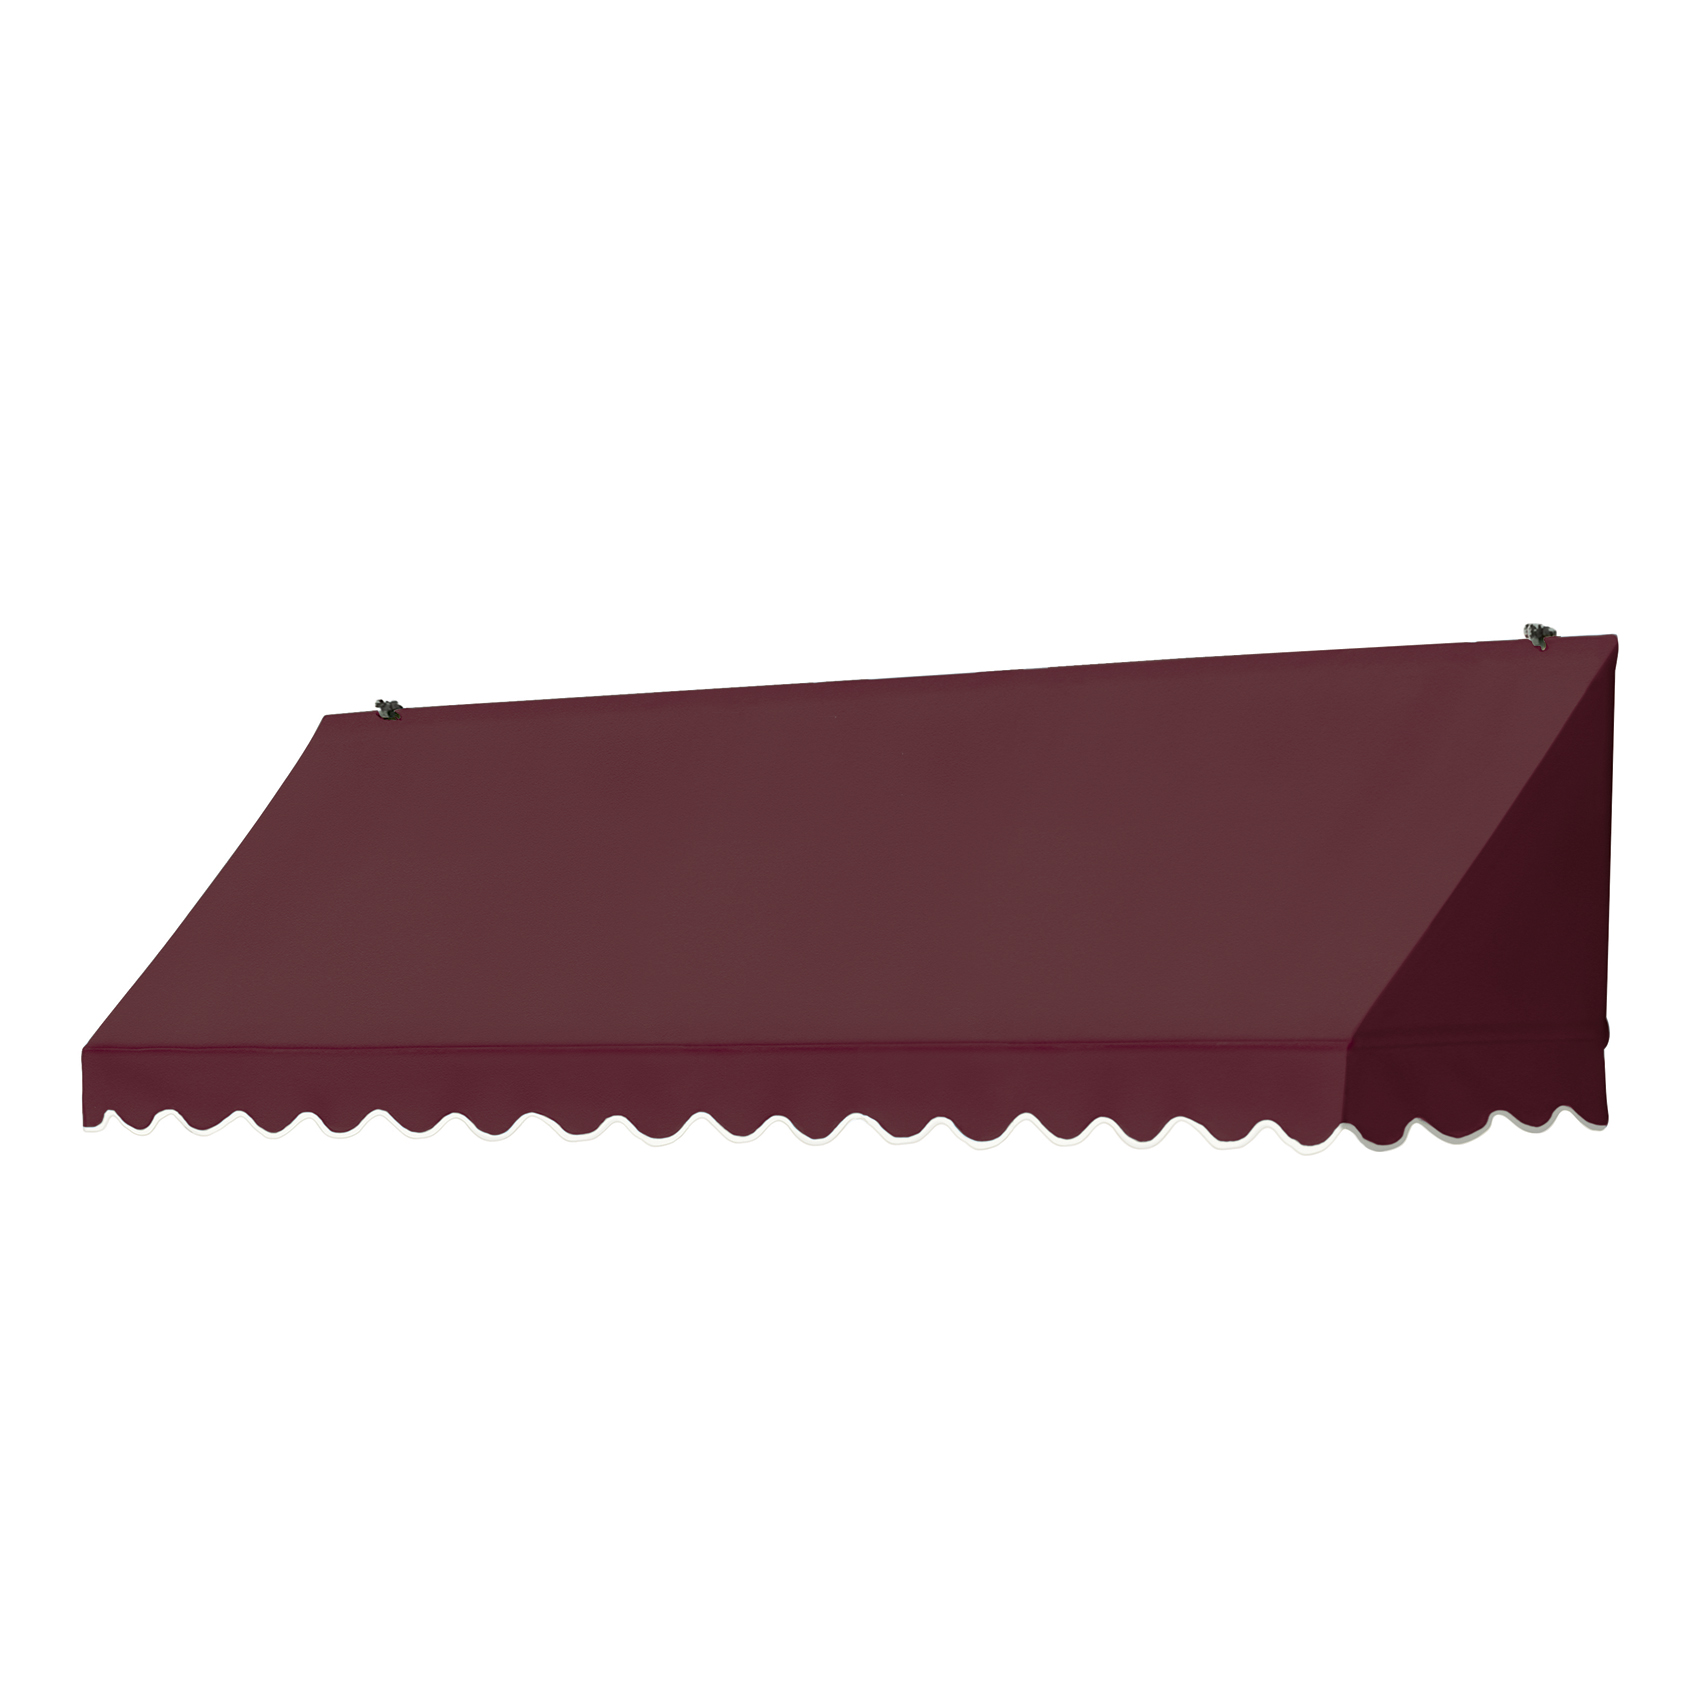 UPC 799870462635 product image for Awnings in a Box®; 8' Traditional Style Awning in Assorted Colors | upcitemdb.com